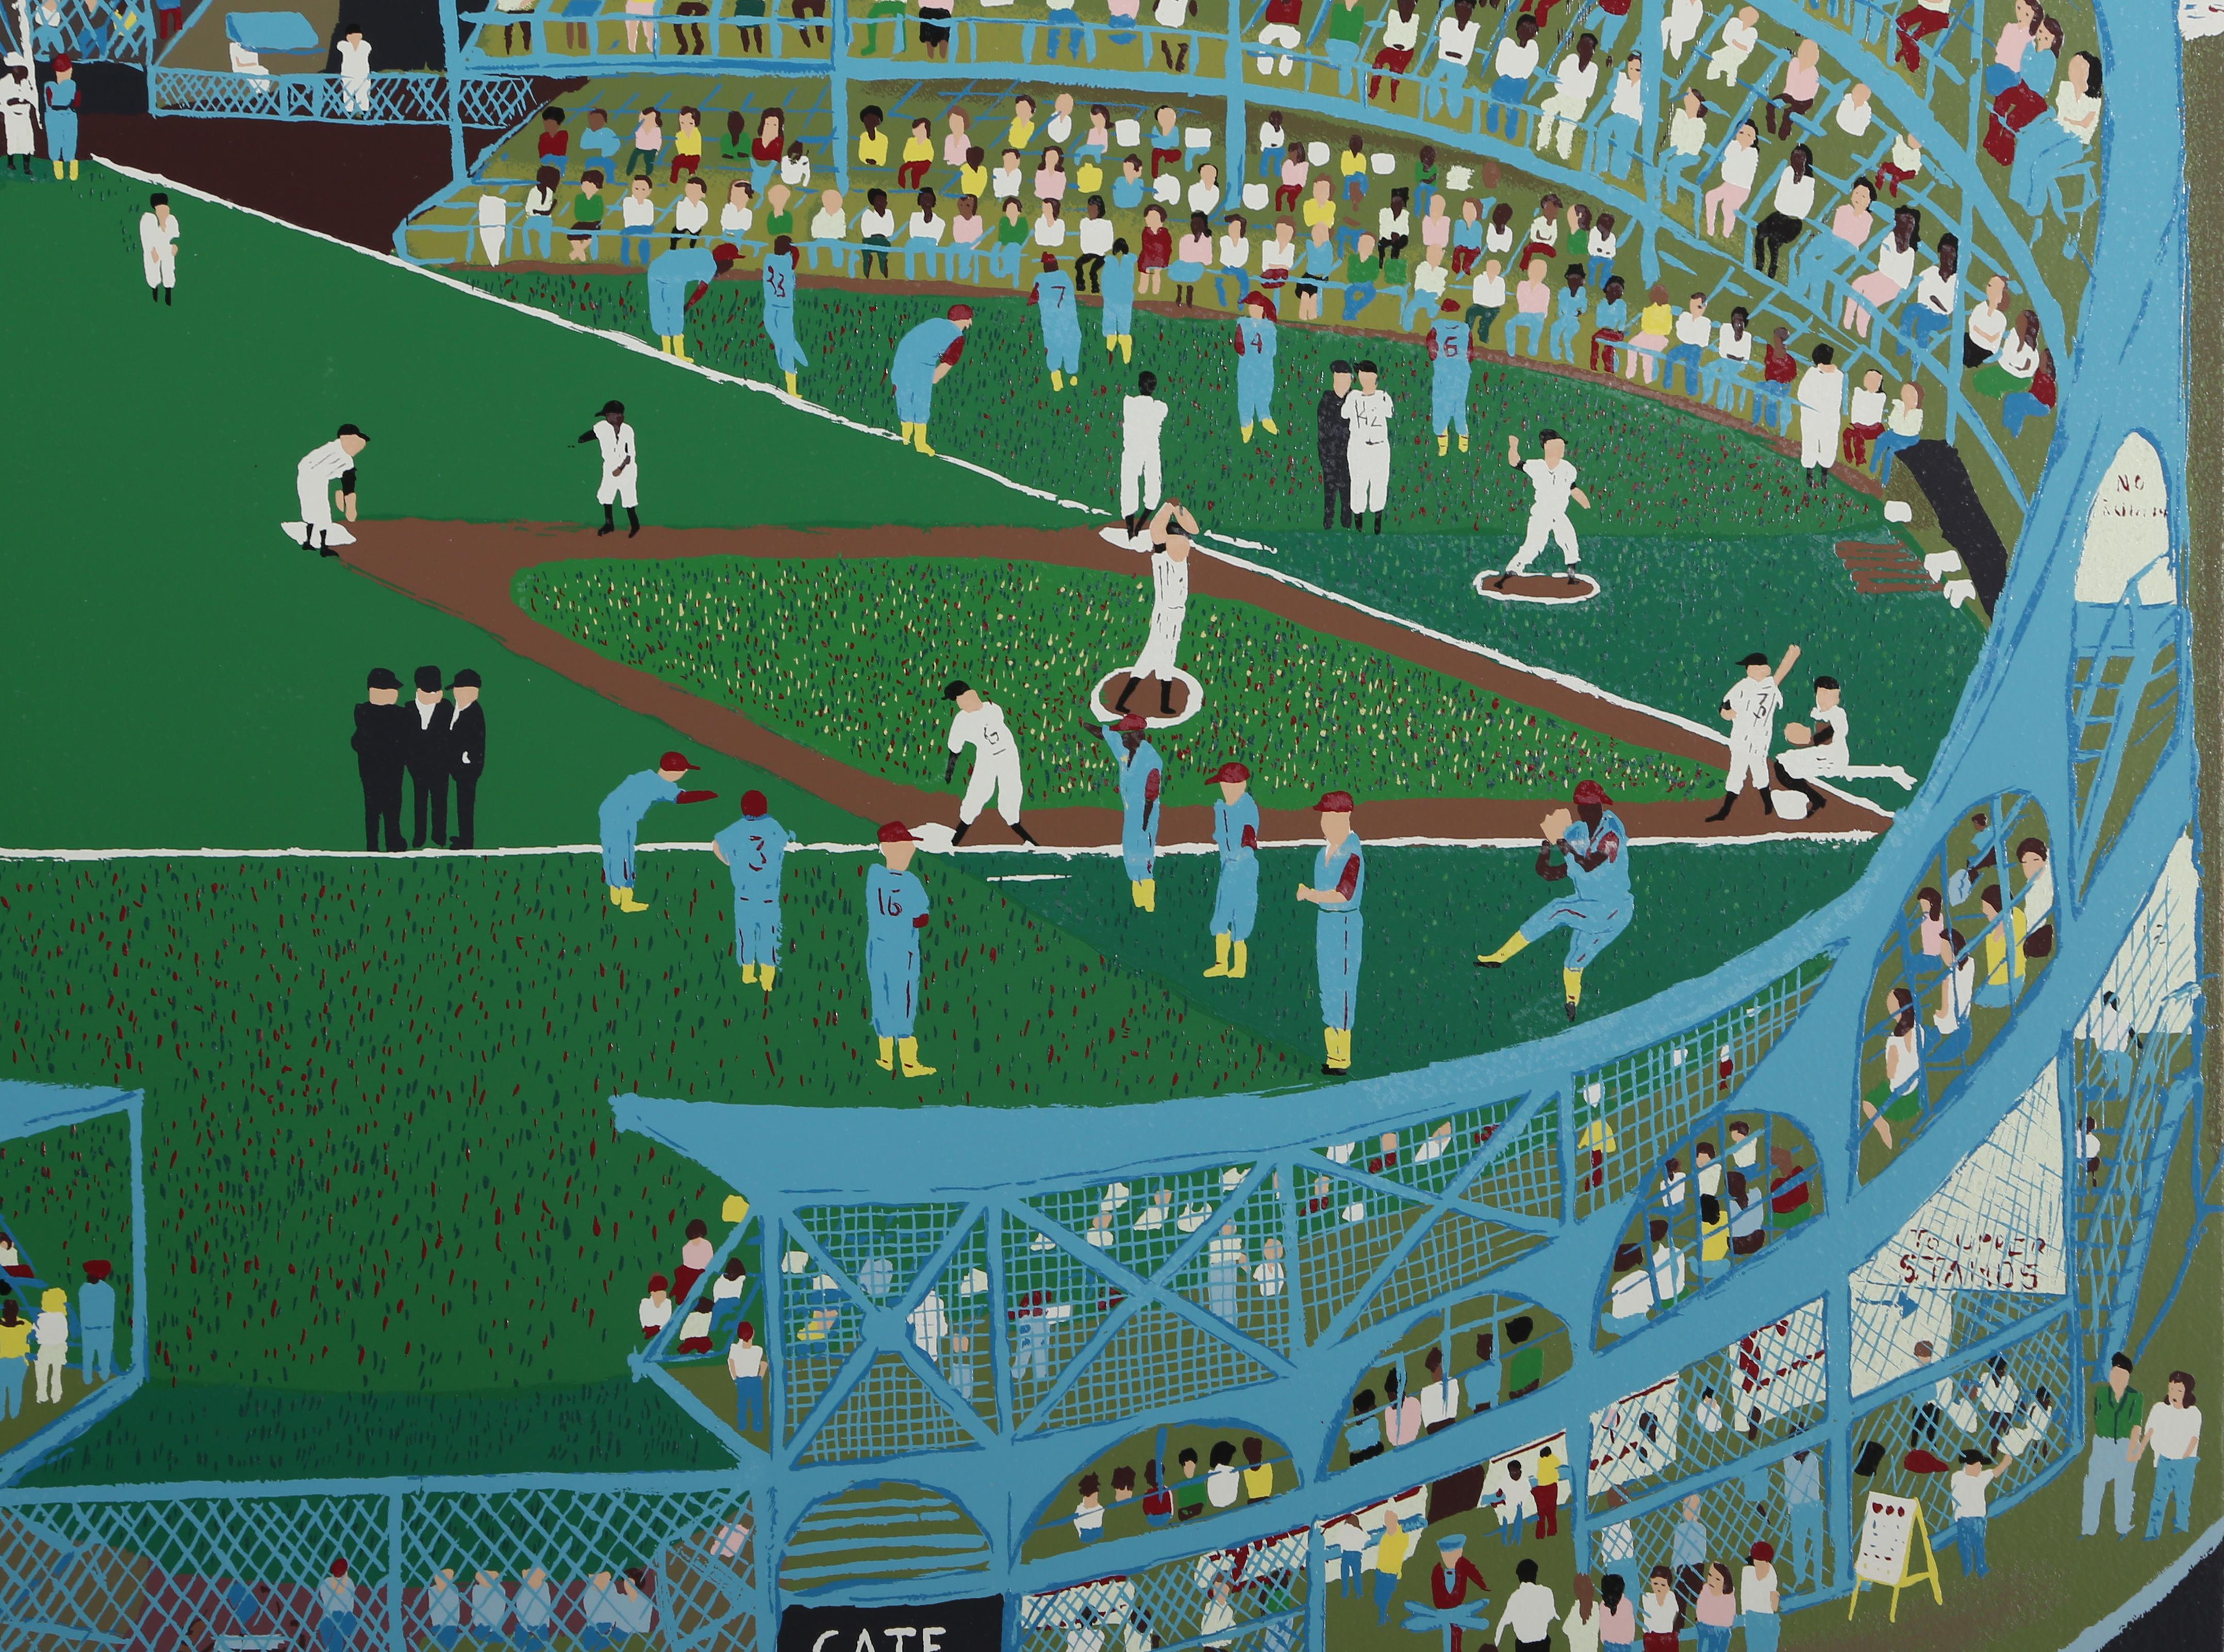 Artist: Ralph Fasanella, American (1914 - 1997)
Title: Ball Park
Year: 1974
Medium: Screenprint on Arches Paper, signed and numbered in pencil
Edition: 250
Image: 25 x 37 inches
Size: 31 in. x 43 in. (78.74 cm x 109.22 cm)